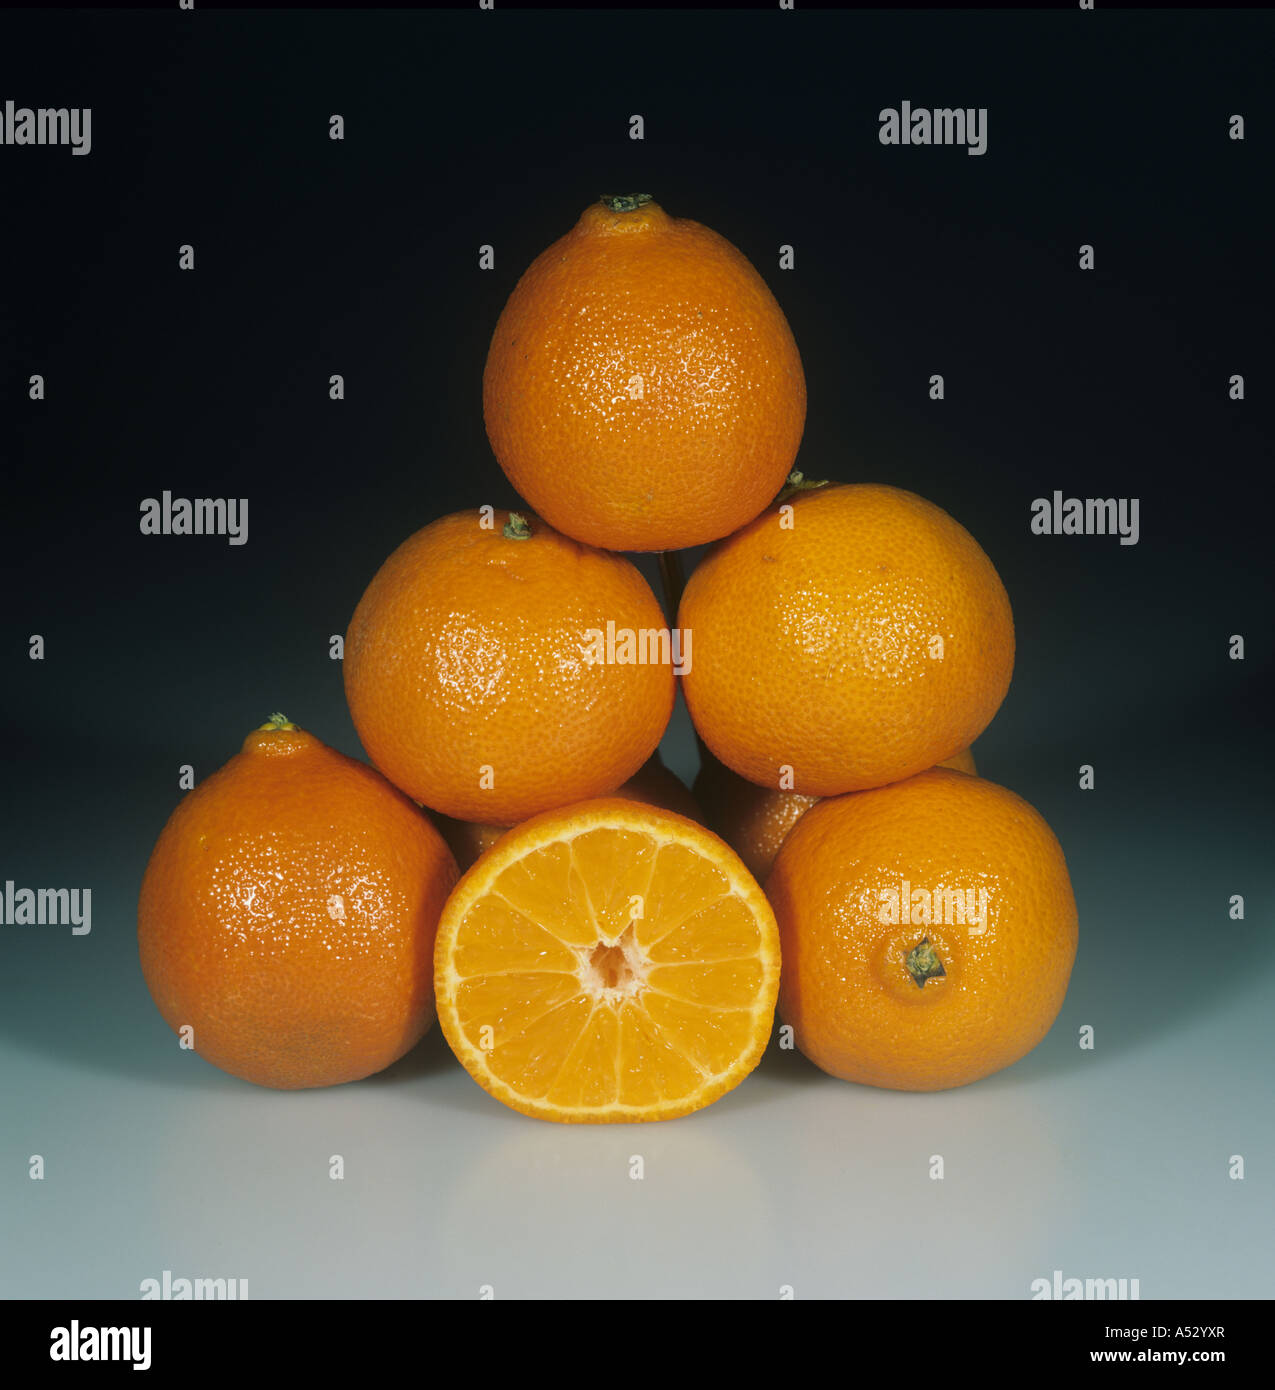 Whole sectioned clementine fruit variety Nour Stock Photo